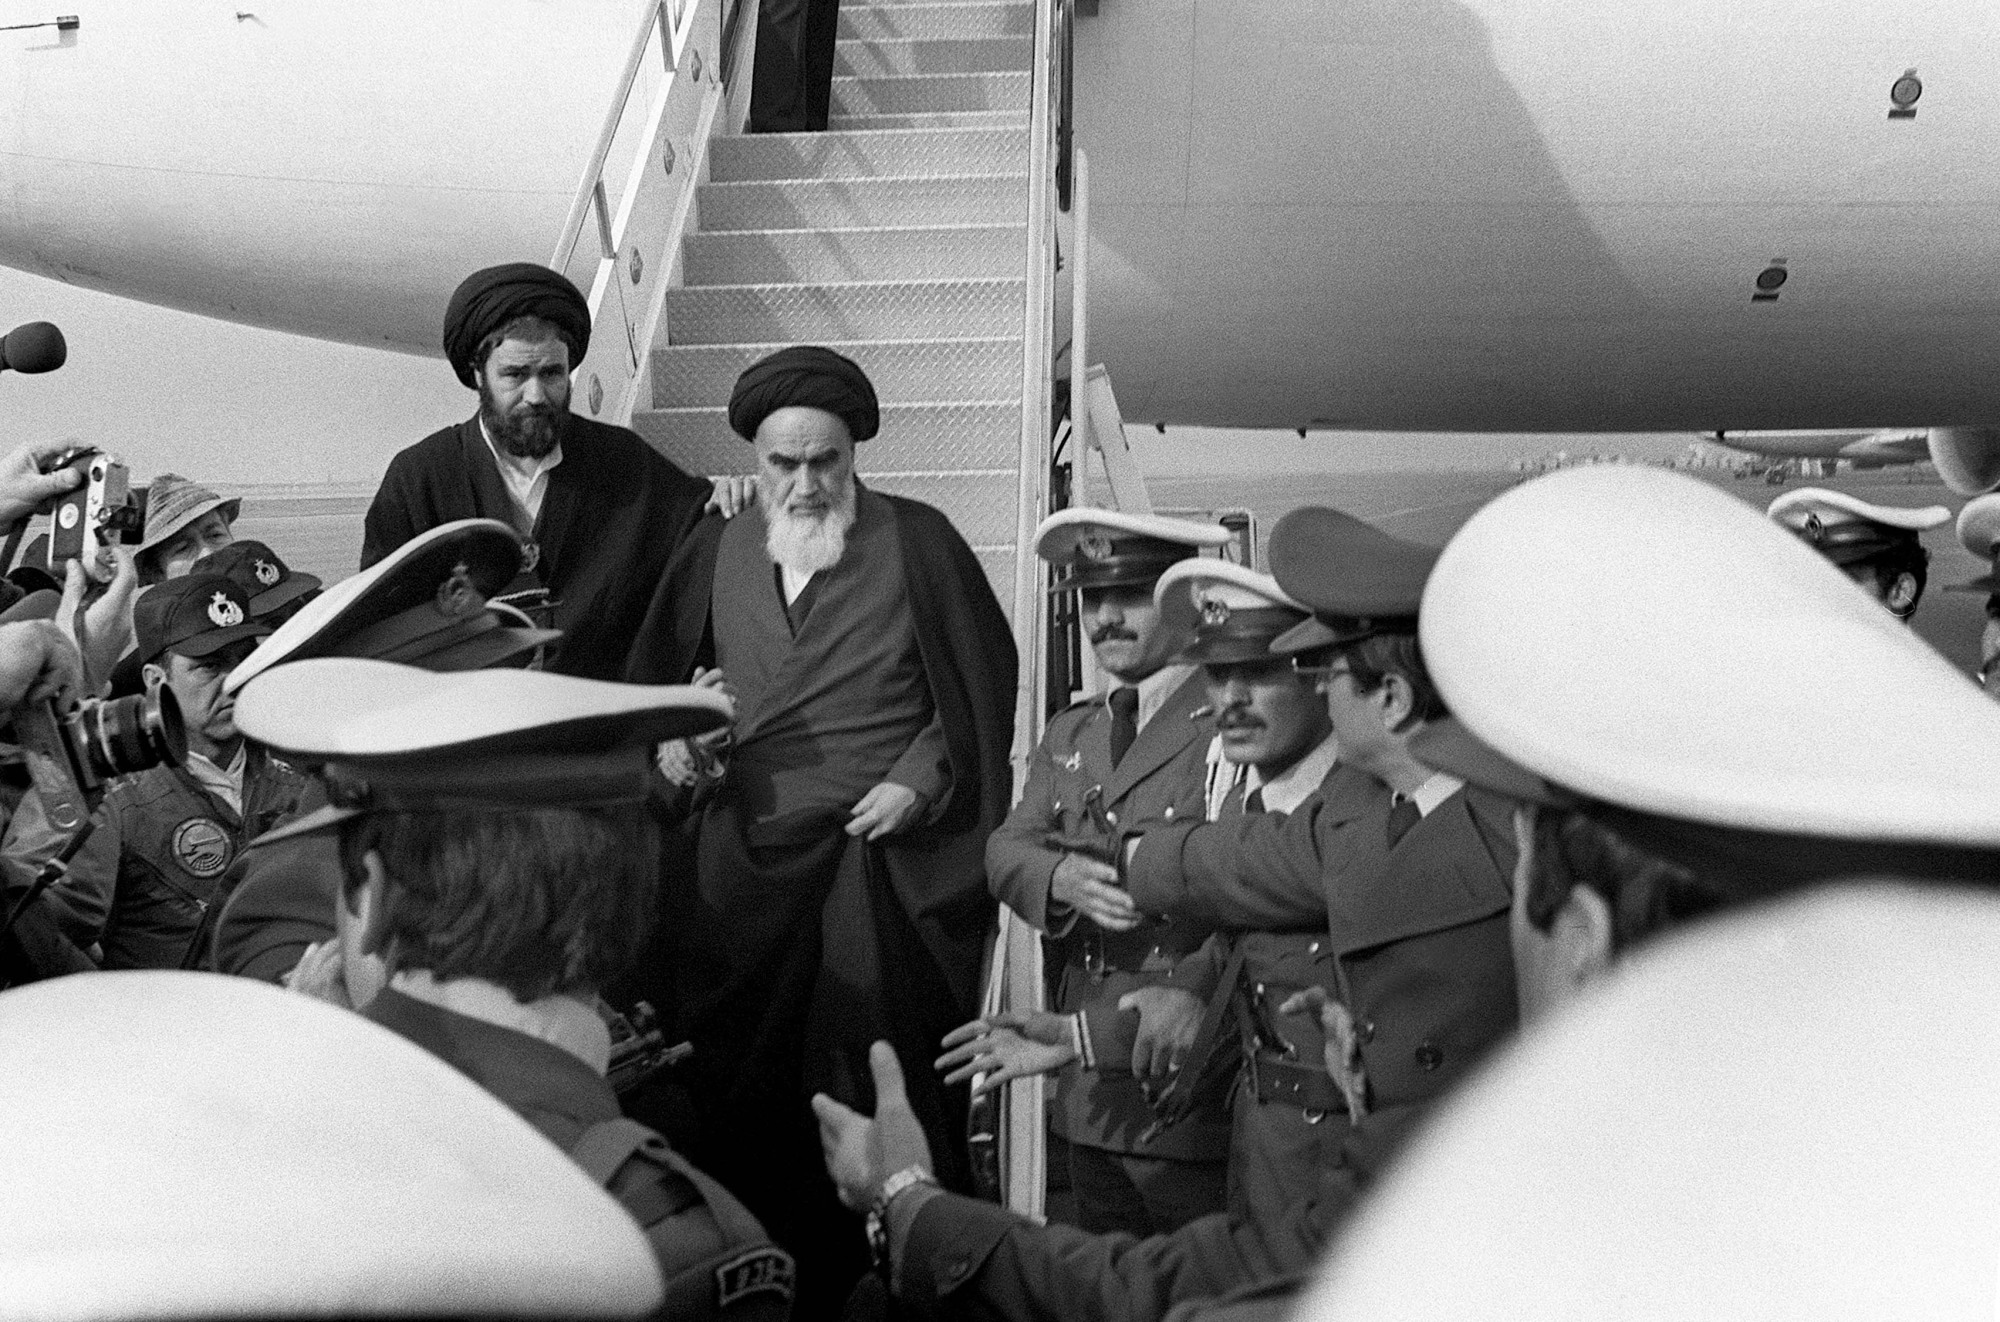 40 years ago, an insult sparked Iran's revolution  The 